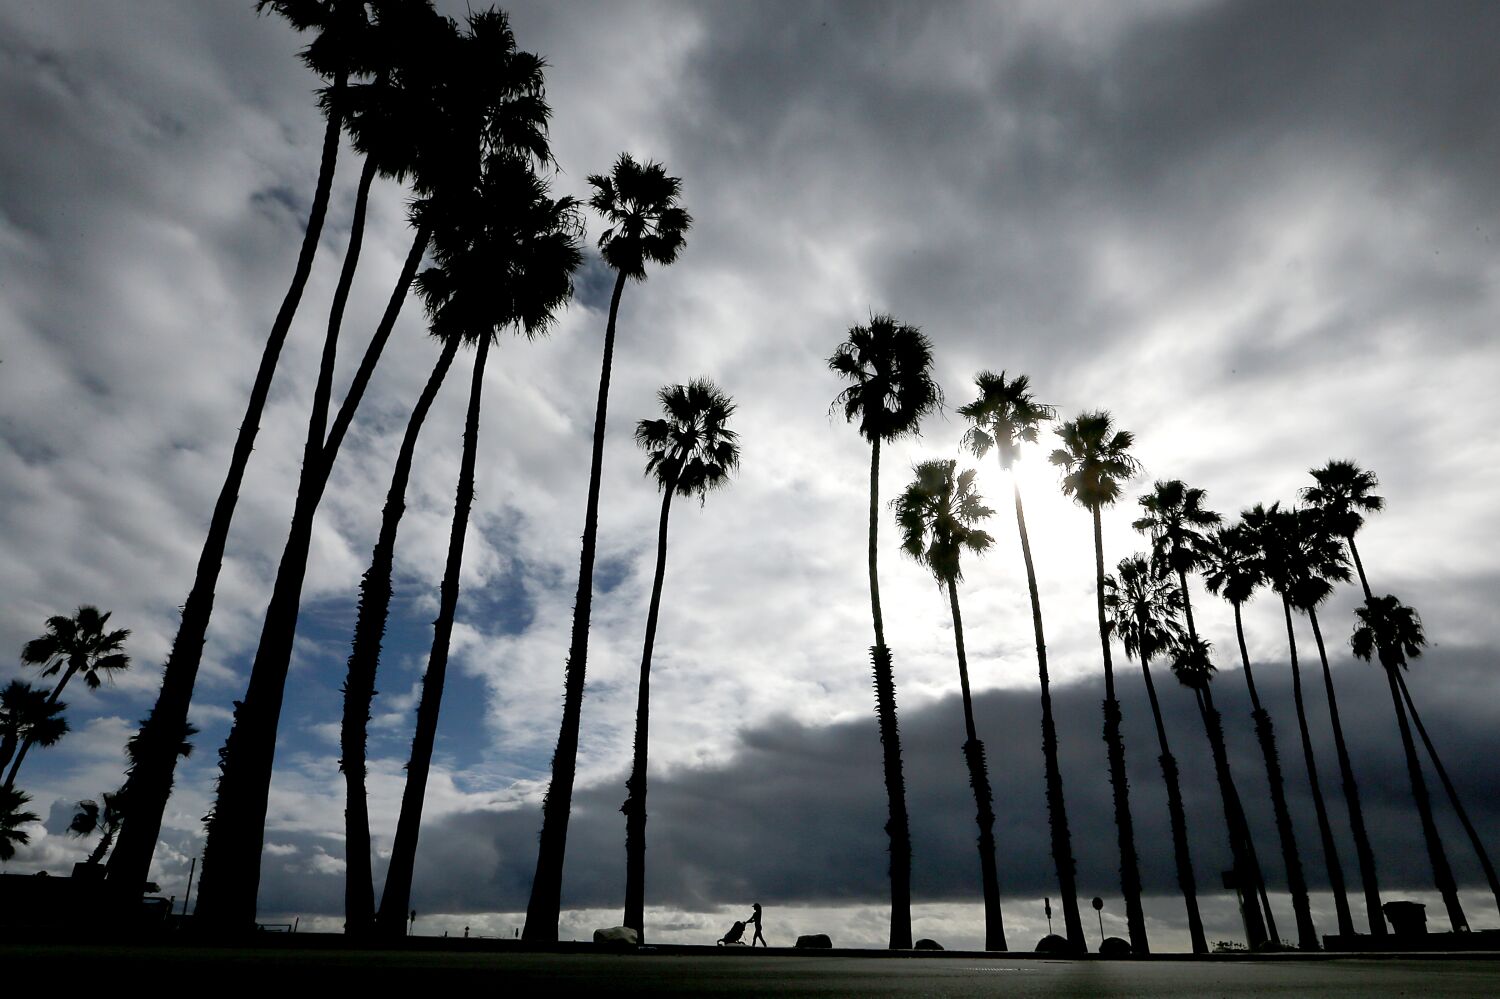 Series of storms to usher in a wet New Year's Eve across Southern California